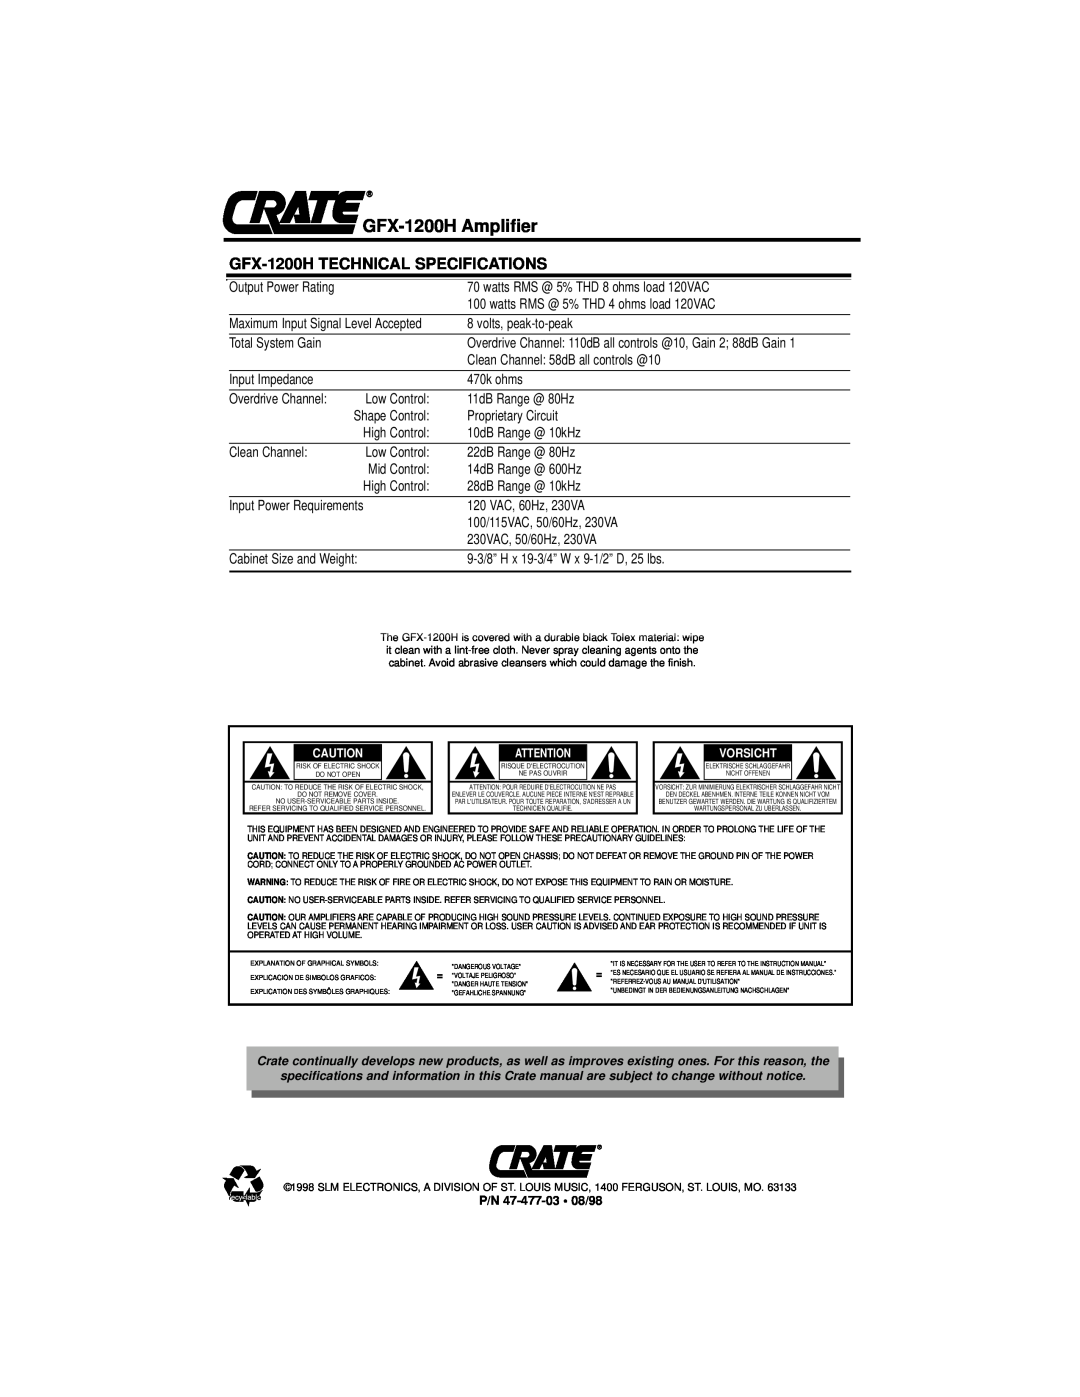 Crate Amplifiers owner manual GFX-1200H Amplifier, GFX-1200H TECHNICAL SPECIFICATIONS 